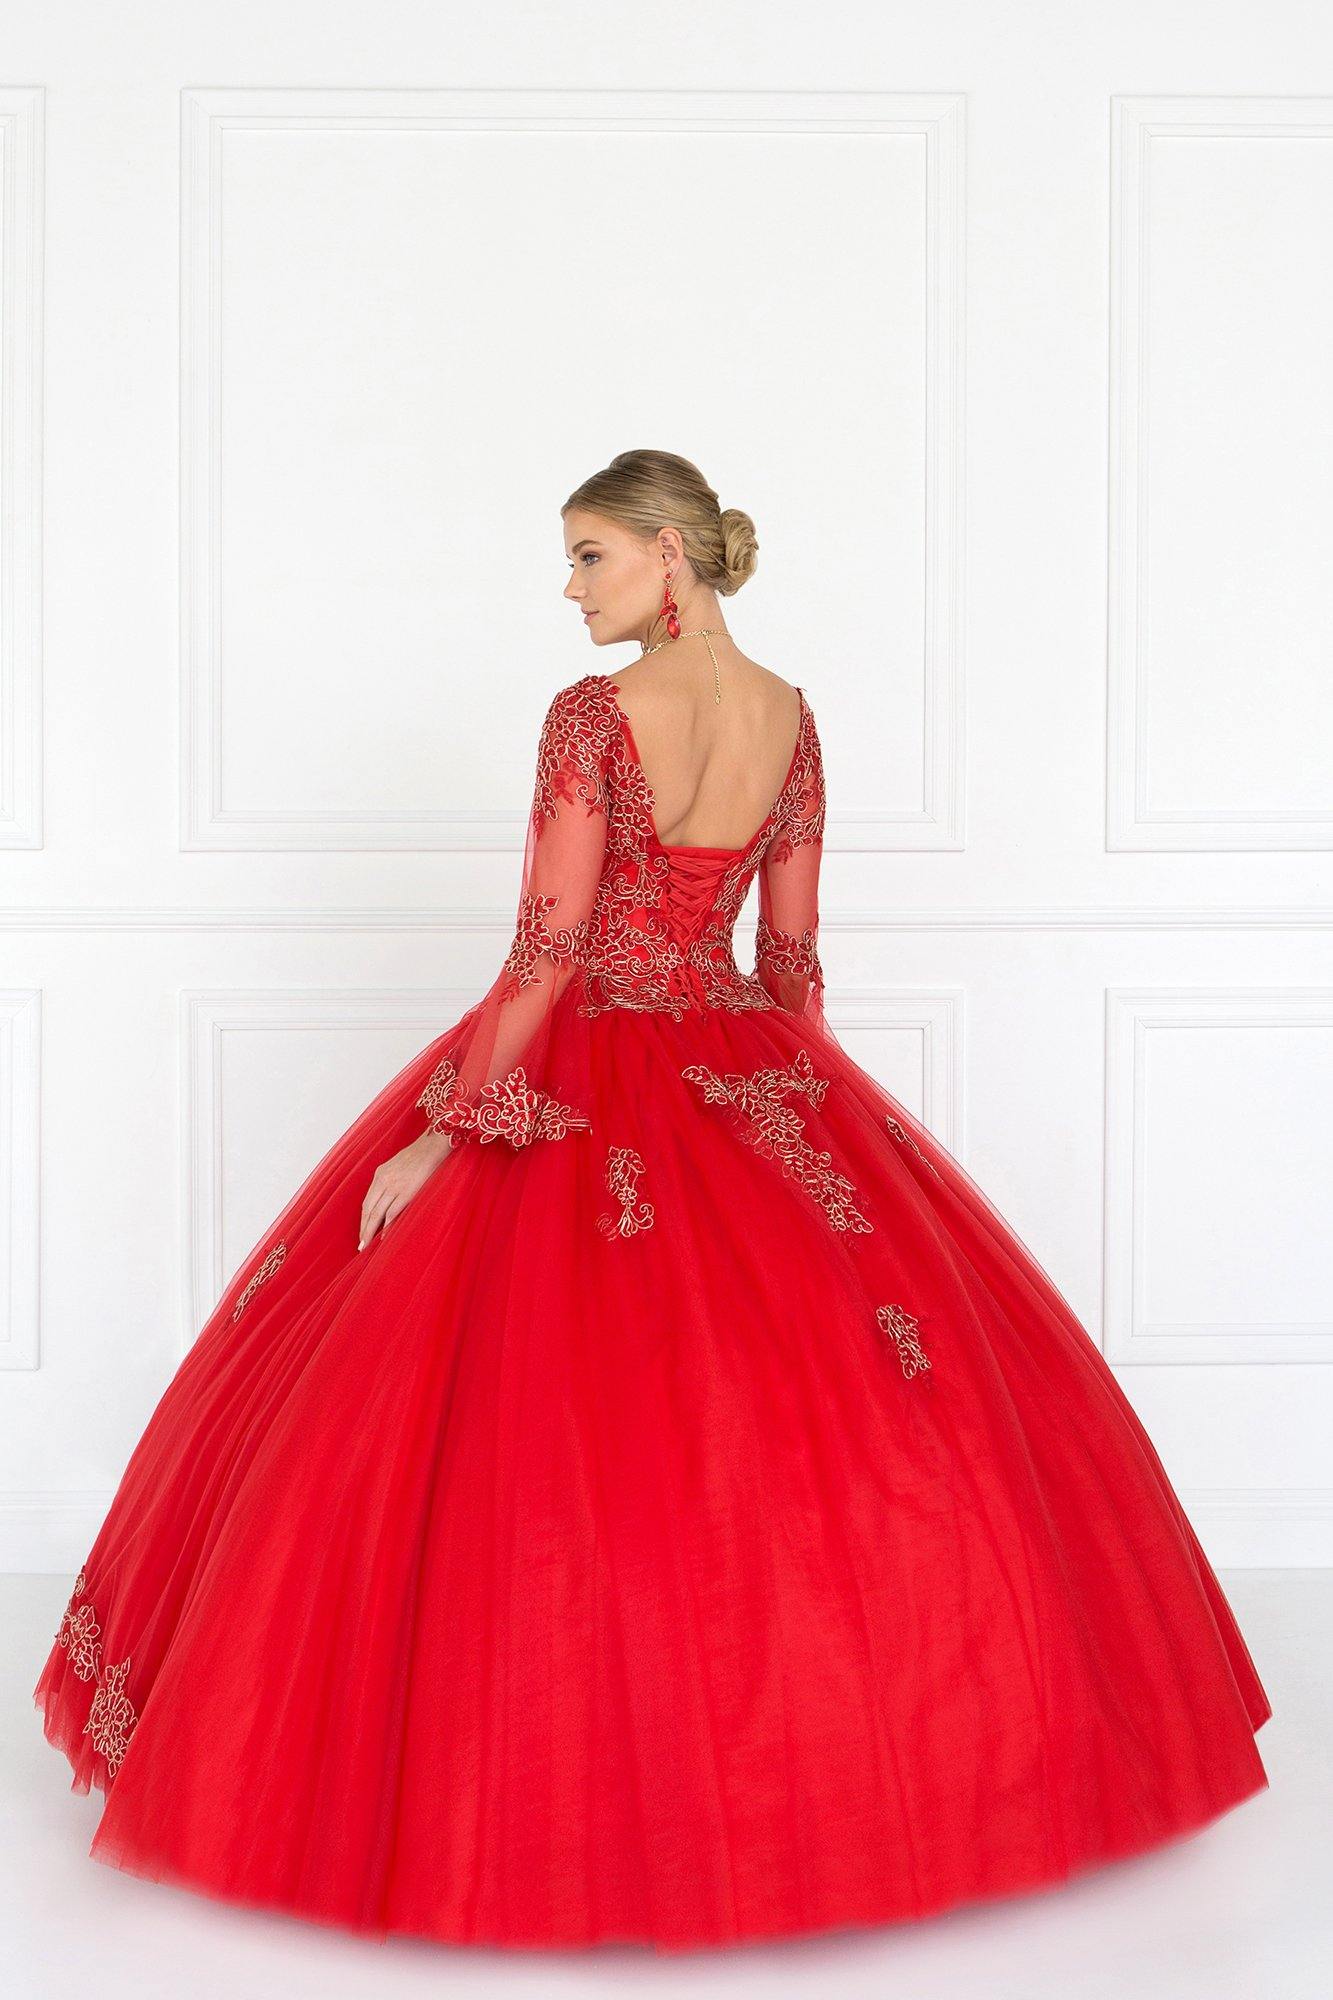 Quinceanera V-Neck Ball Gown Dress with Bell Sleeves - The Dress Outlet Elizabeth K